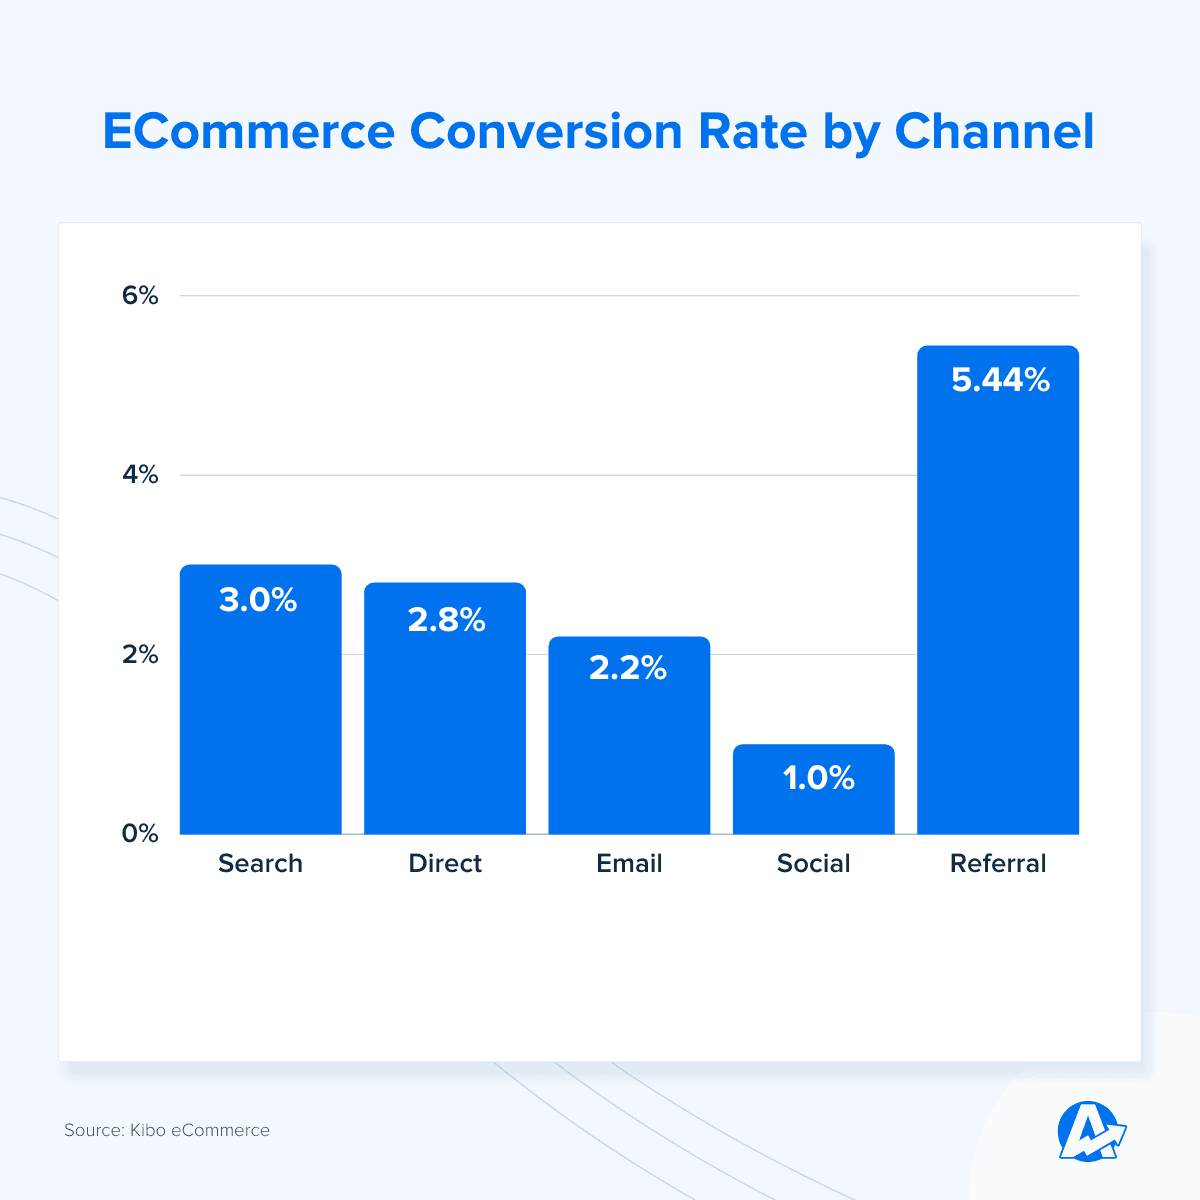 AgencyAnalytics ECommerce Conversion Rate by Channel Bar Chart